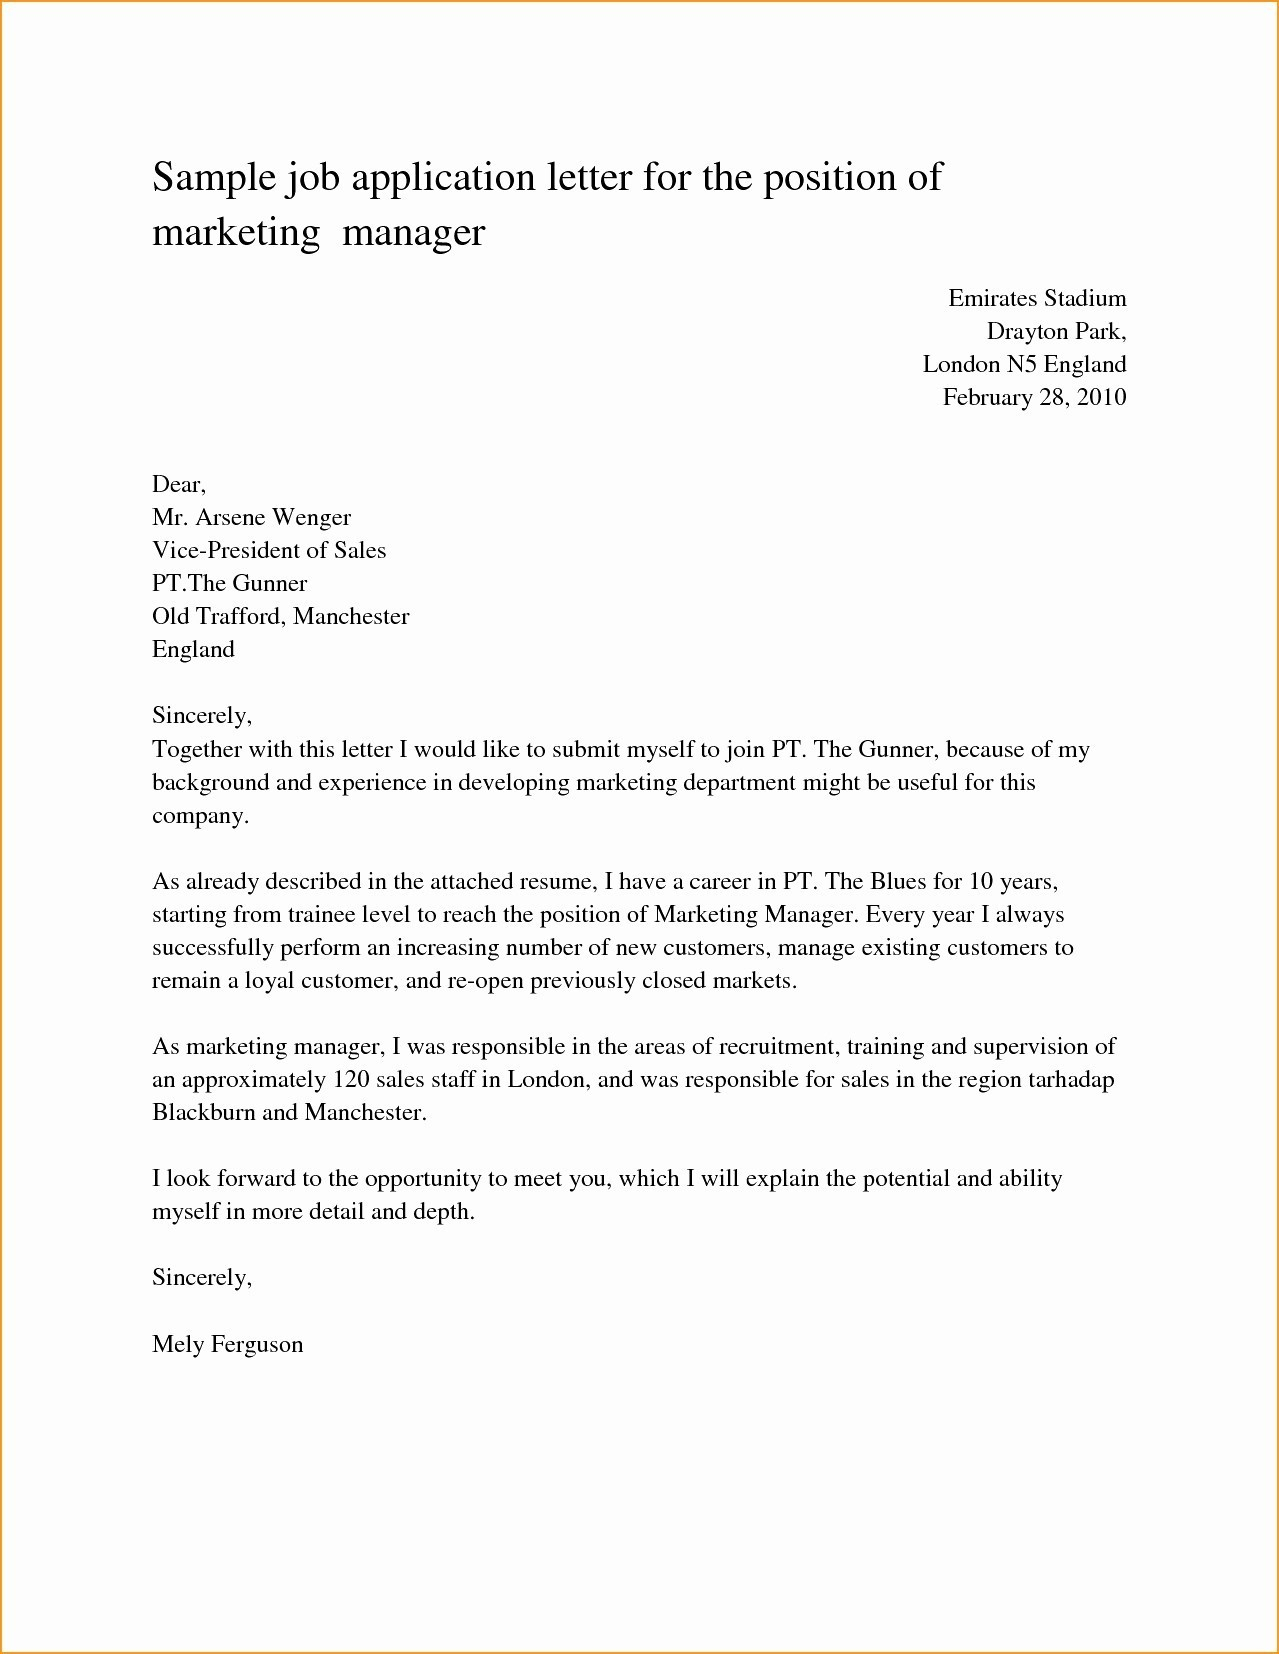 cover letter returning to previous career